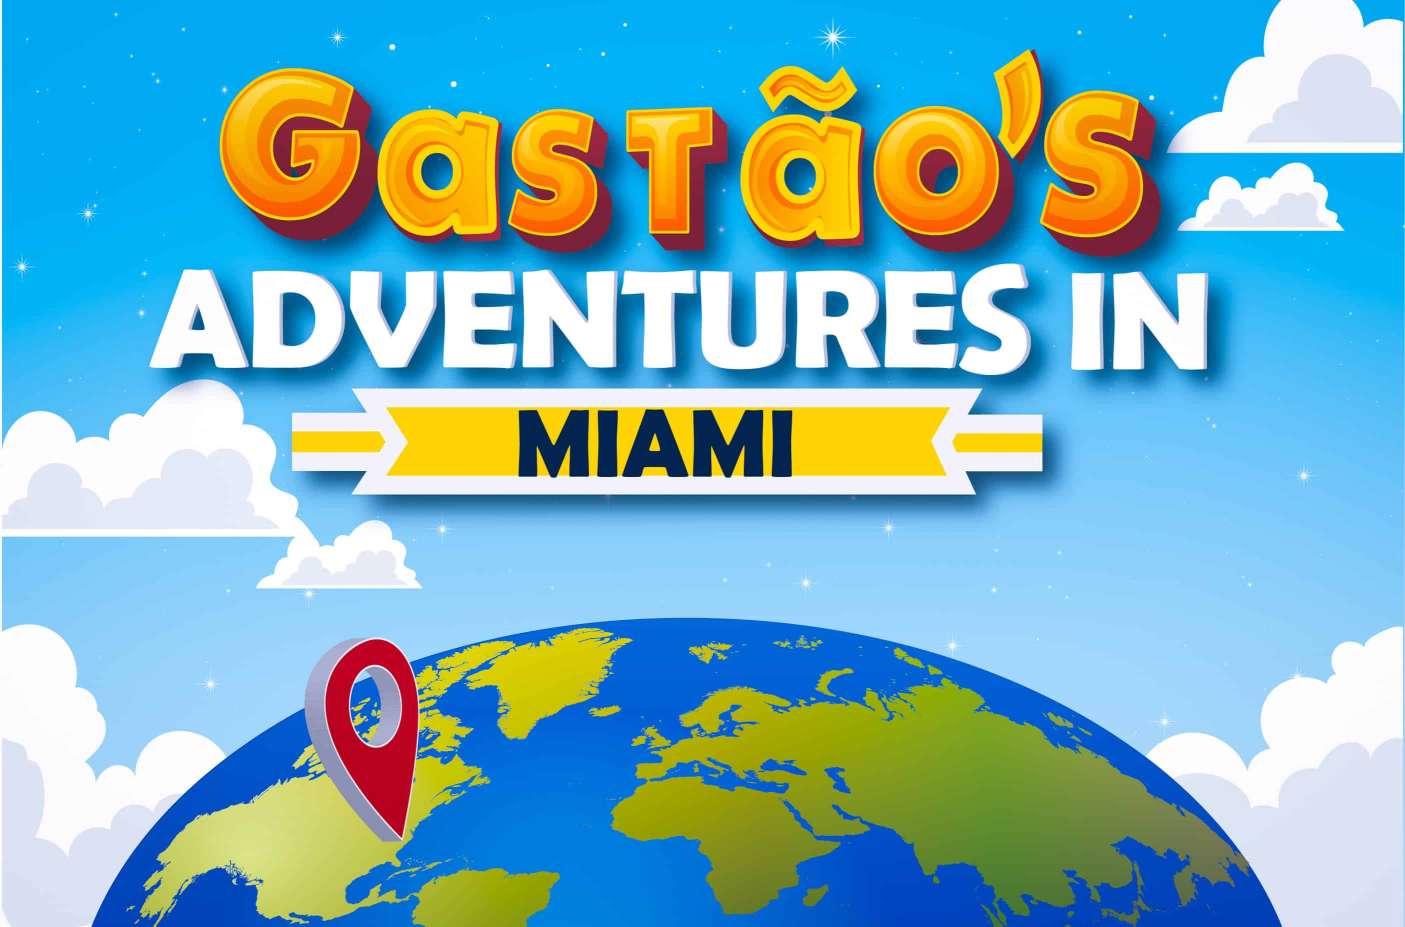 Gastão's Adventures In Miami Book, 2020. Published by Nonsuch Editions.